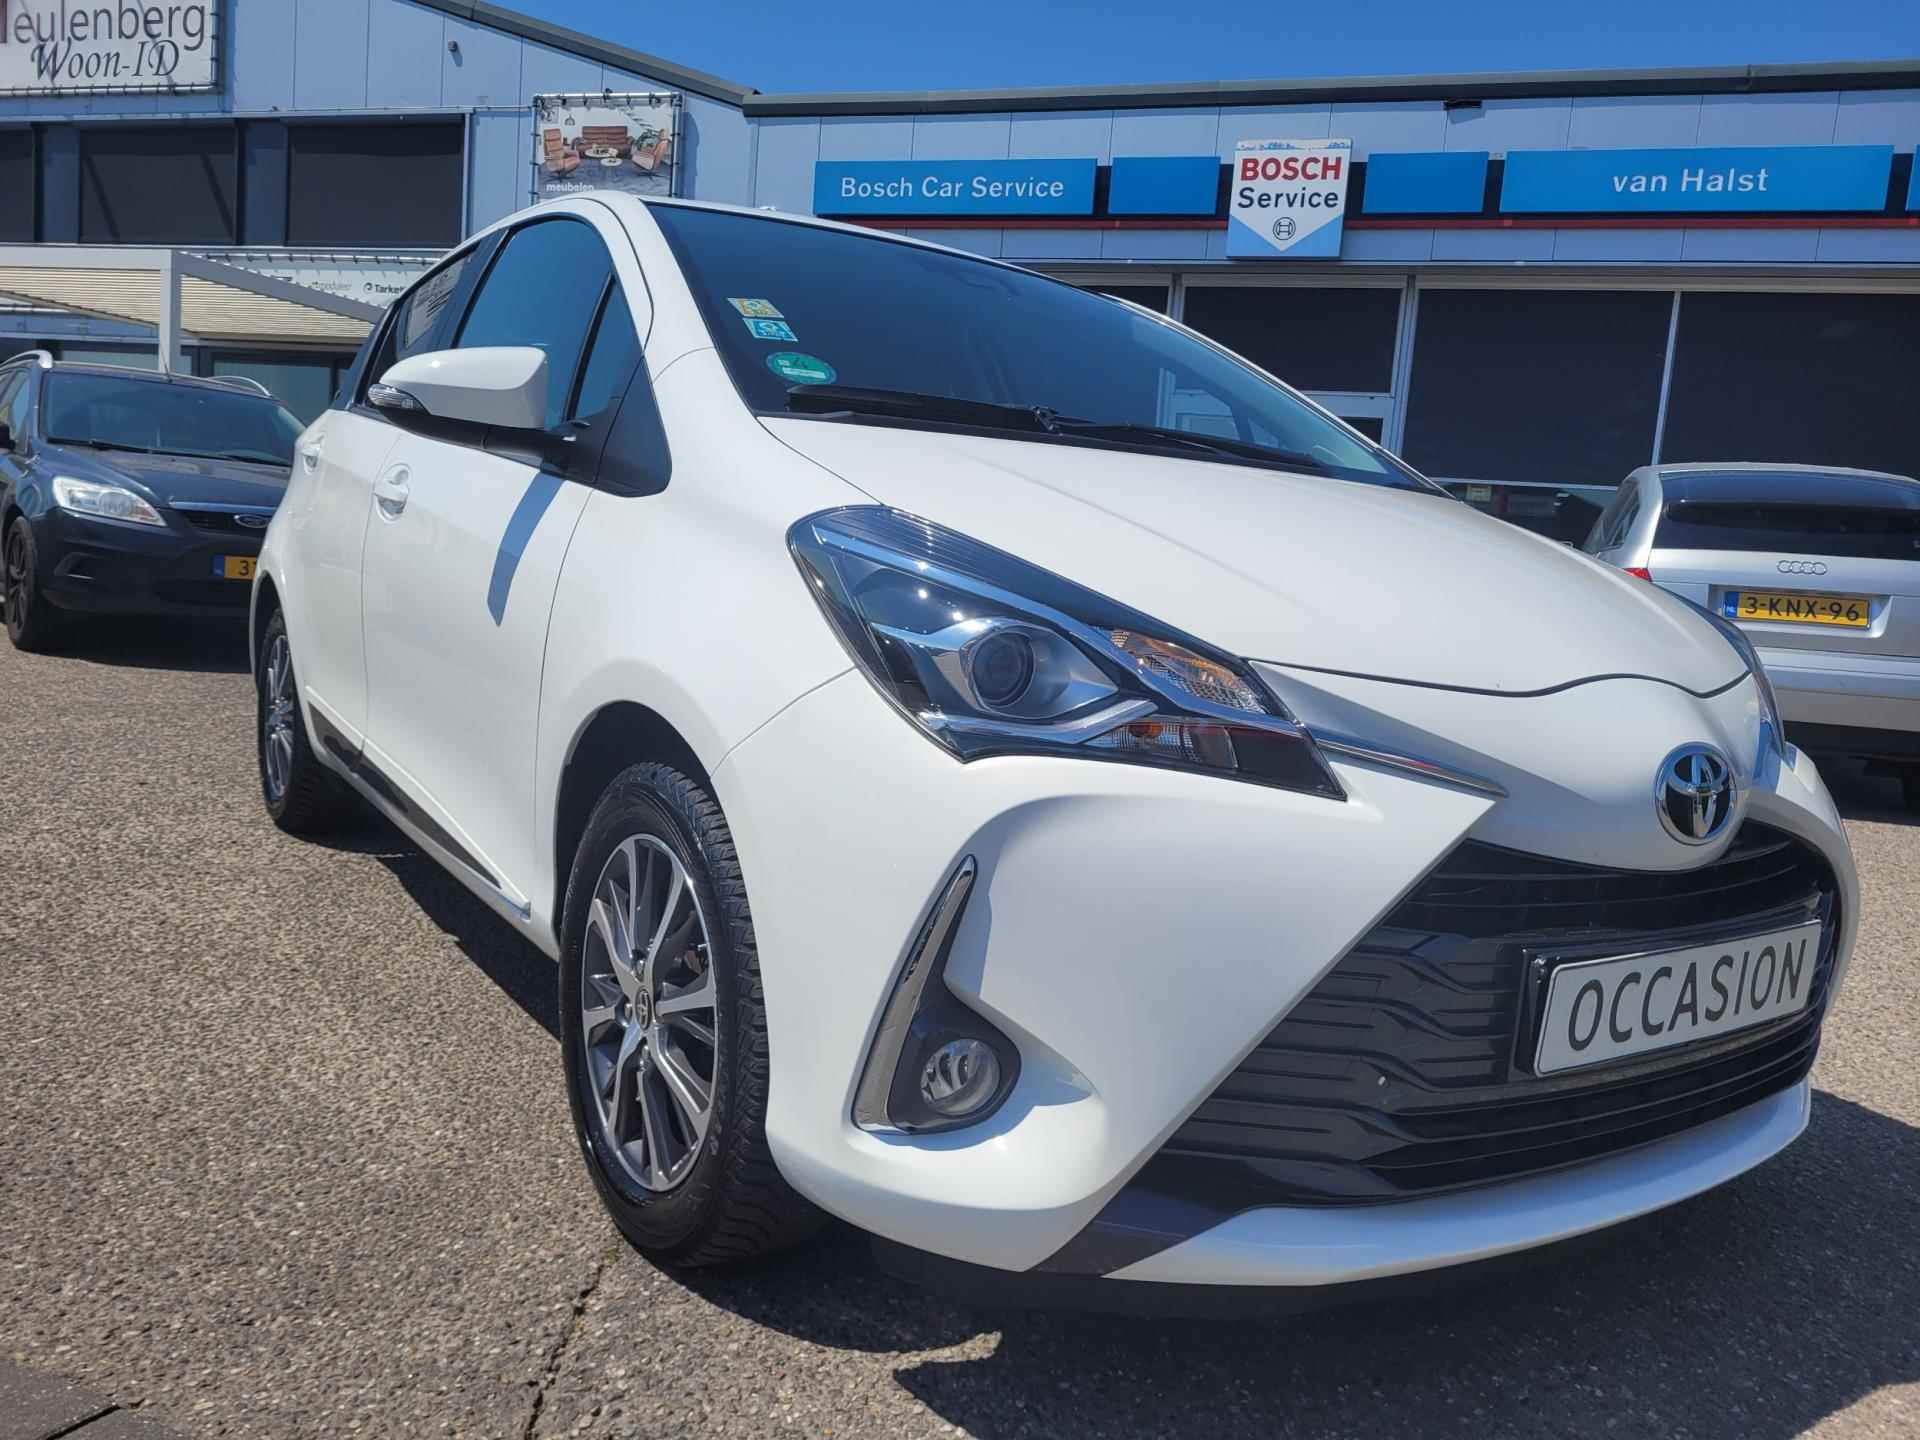 Toyota Yaris 1.5 VVT-i Dynamic Y20 AUTOMAAT / APPLE+ANDROID CAR PLAY / BTW Auto - 15/30